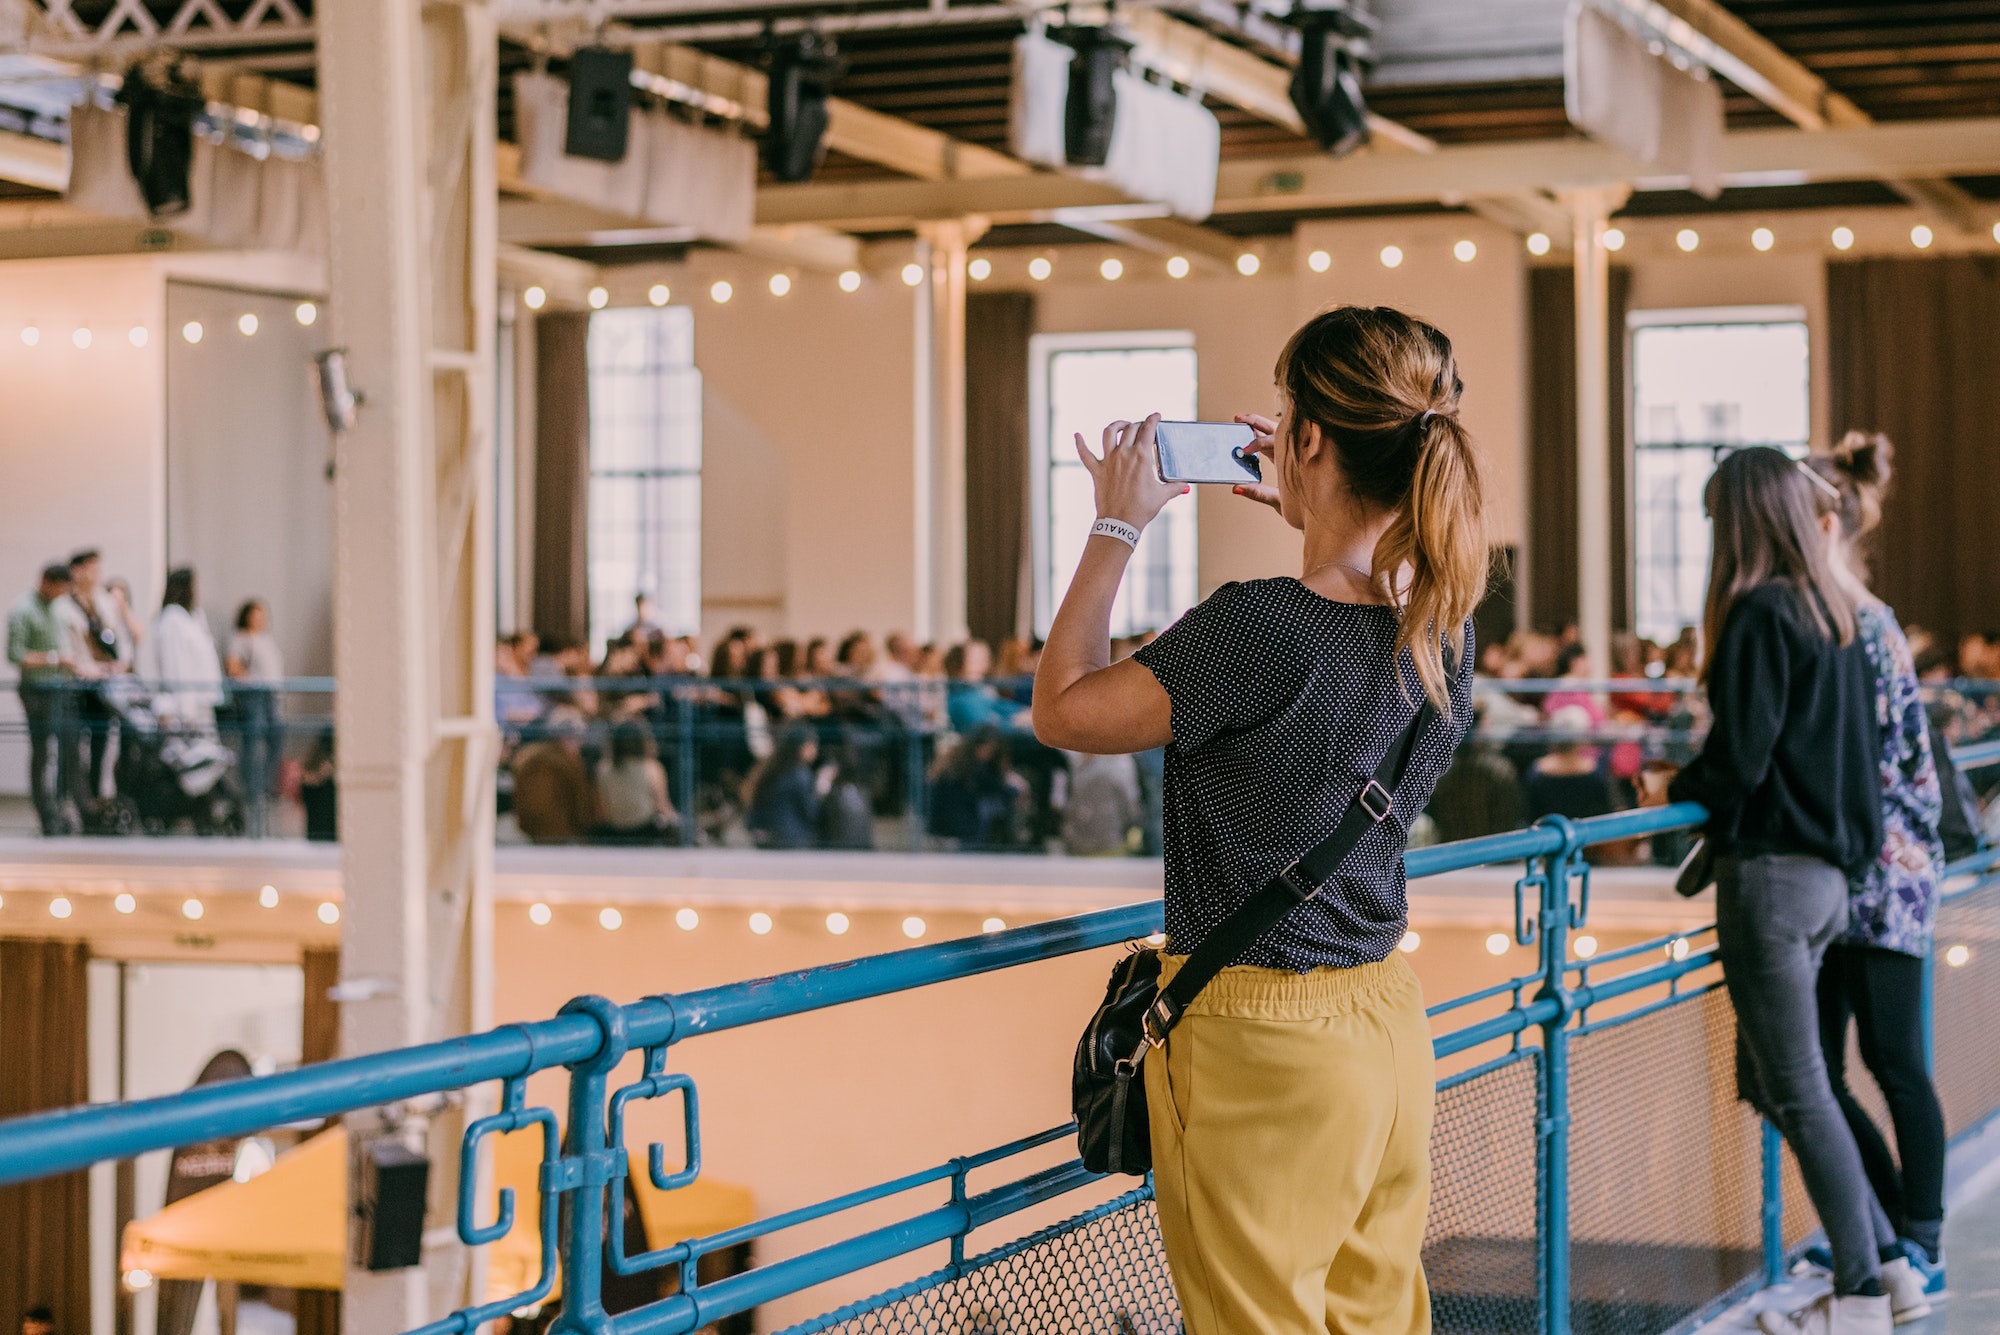 Event venue. Woman taking a picture of an event venue with her mobile phone.